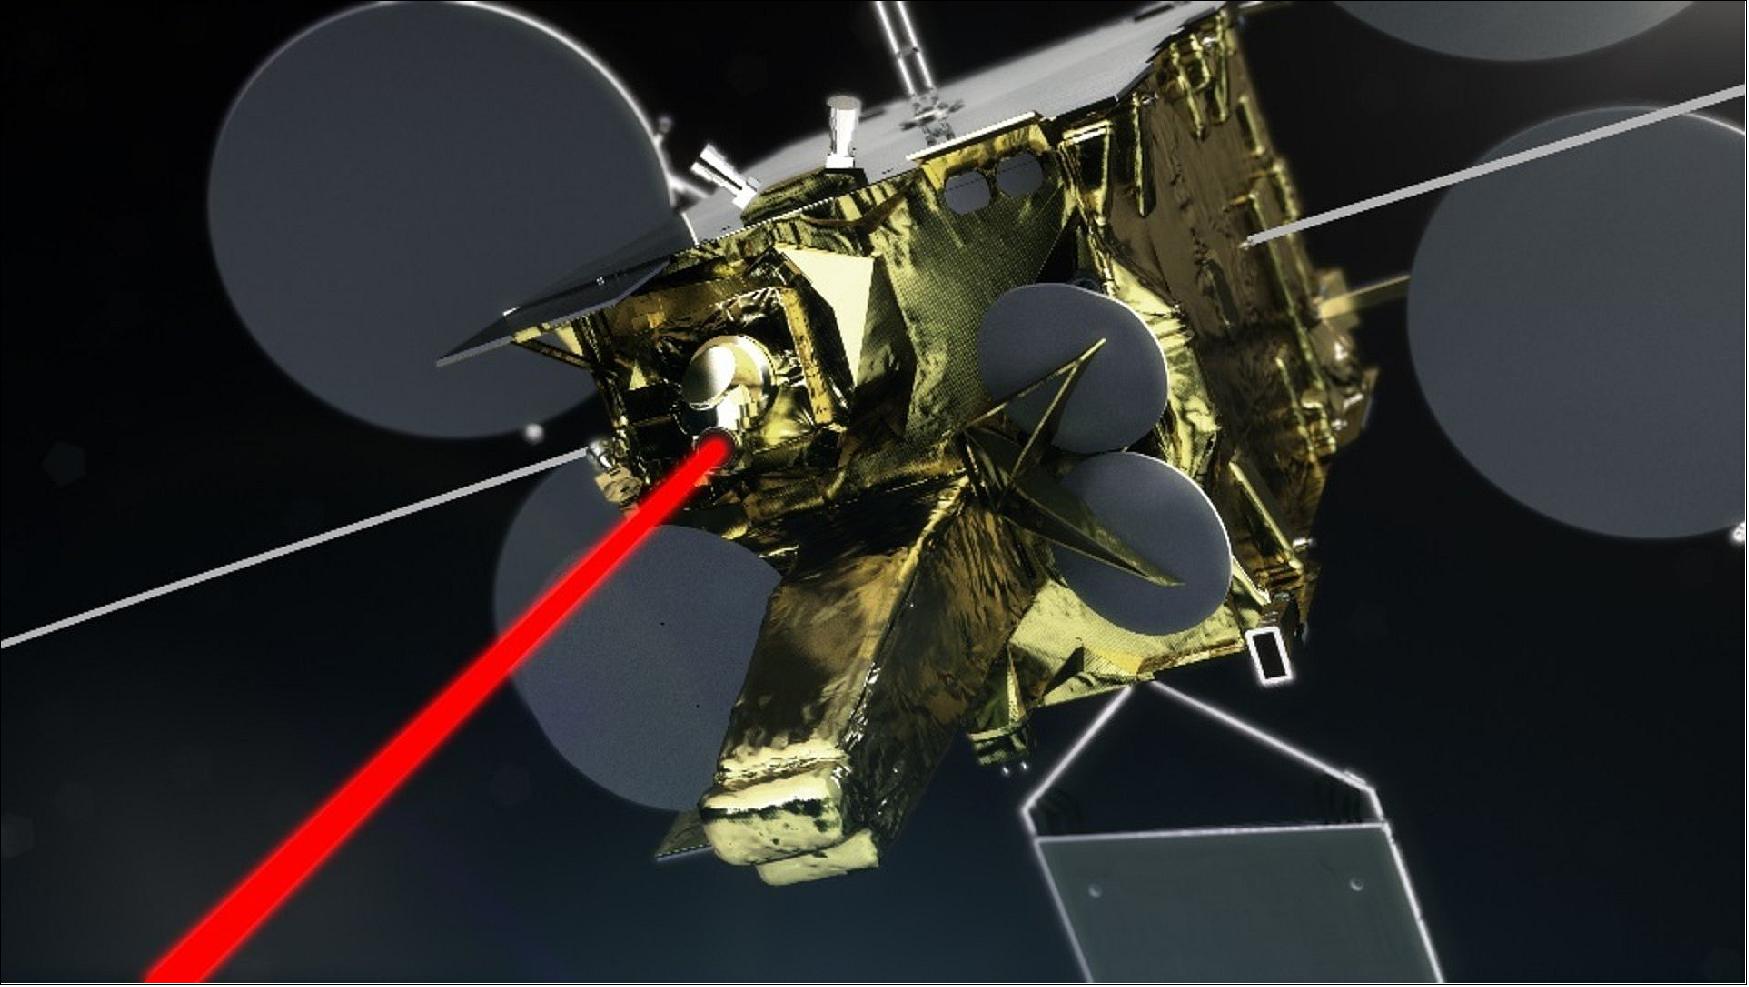 Figure 19: Illustration of the EDRS-A spacecraft in GEO transmitting high-rate data on laser beam technology between LEO spacecraft and Earth (image credit: ESA)